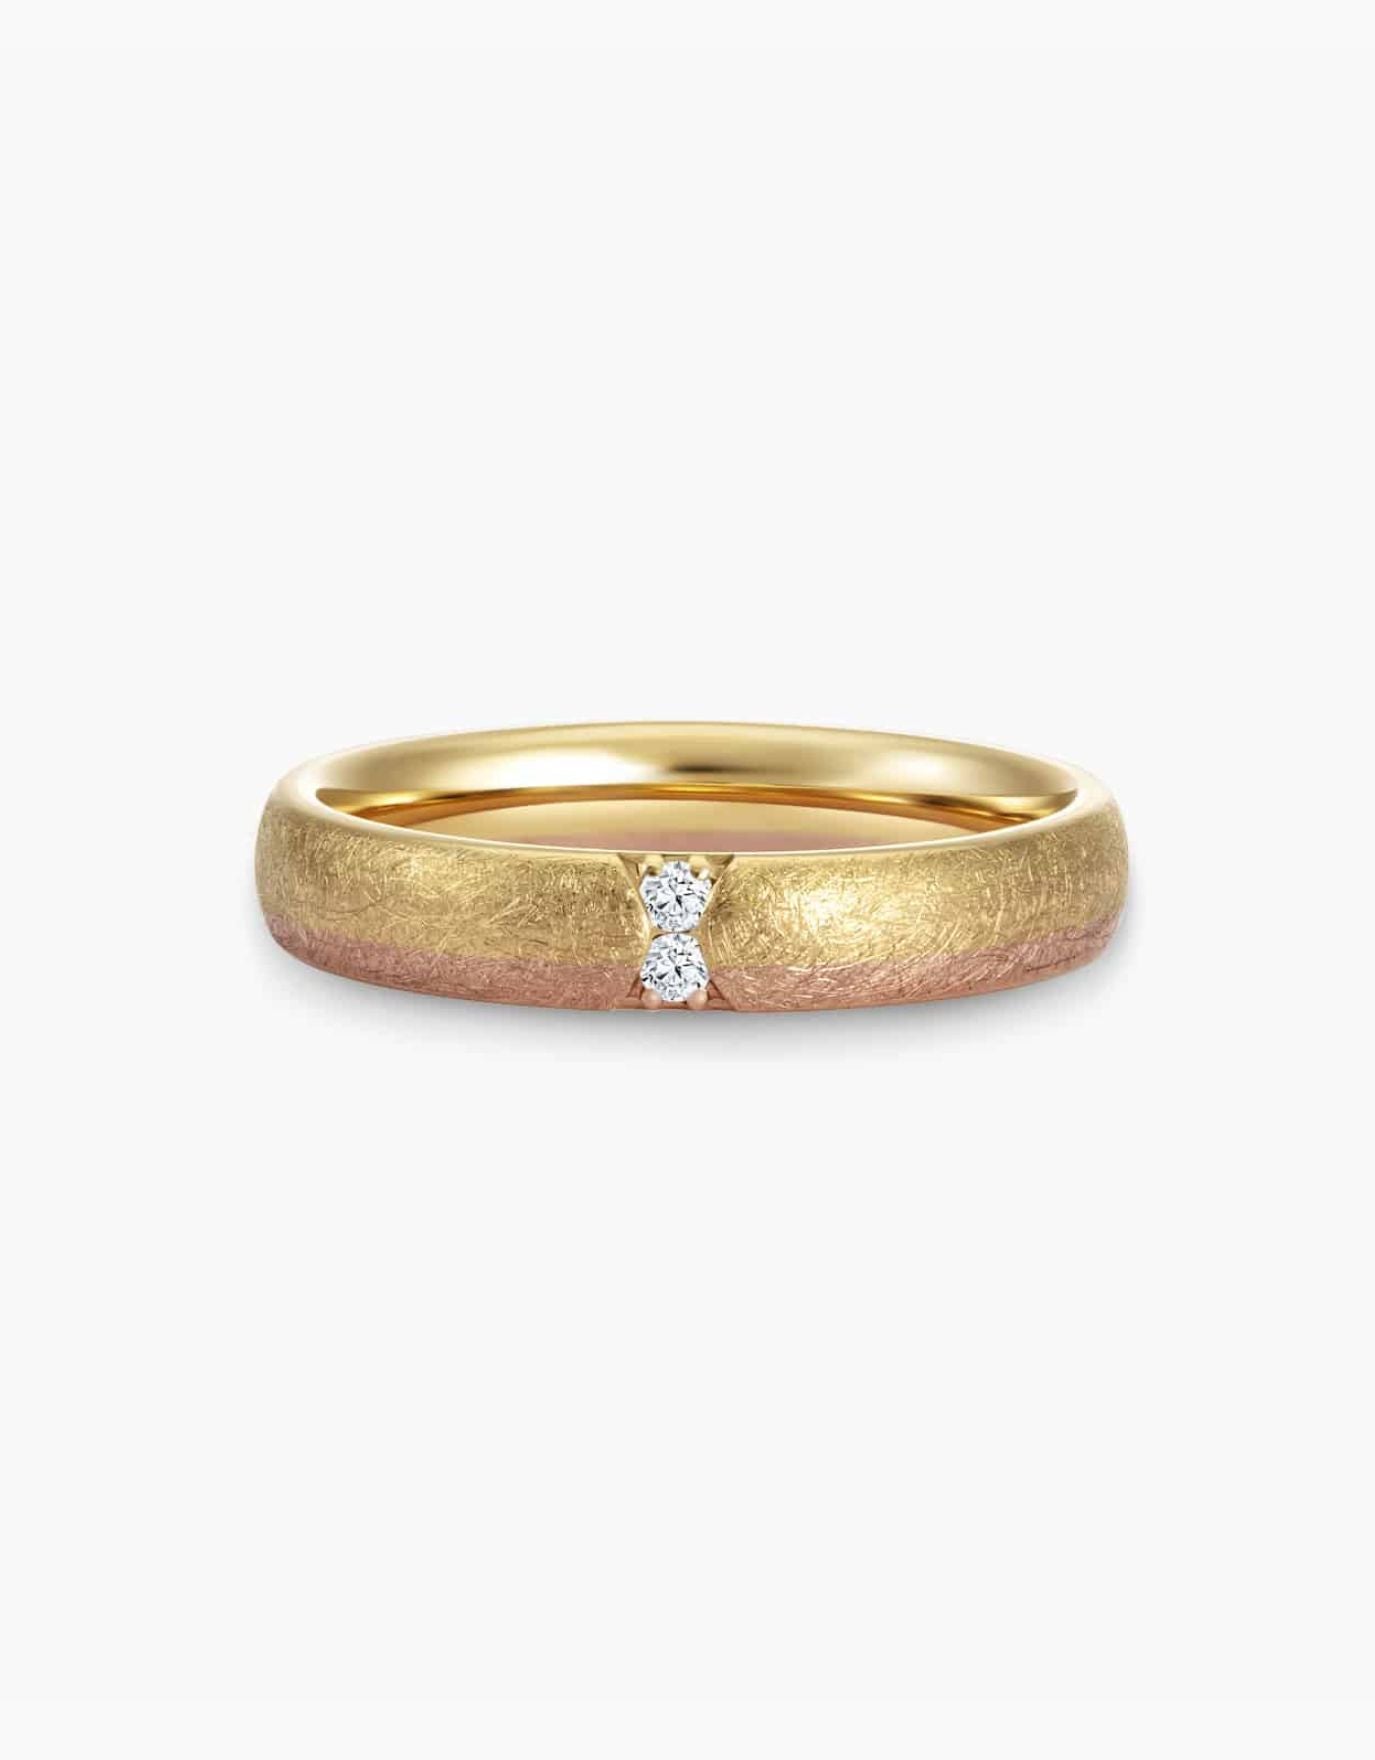 LVC Soleil Apollo Wedding Band in Matte Finish with Dual Tones